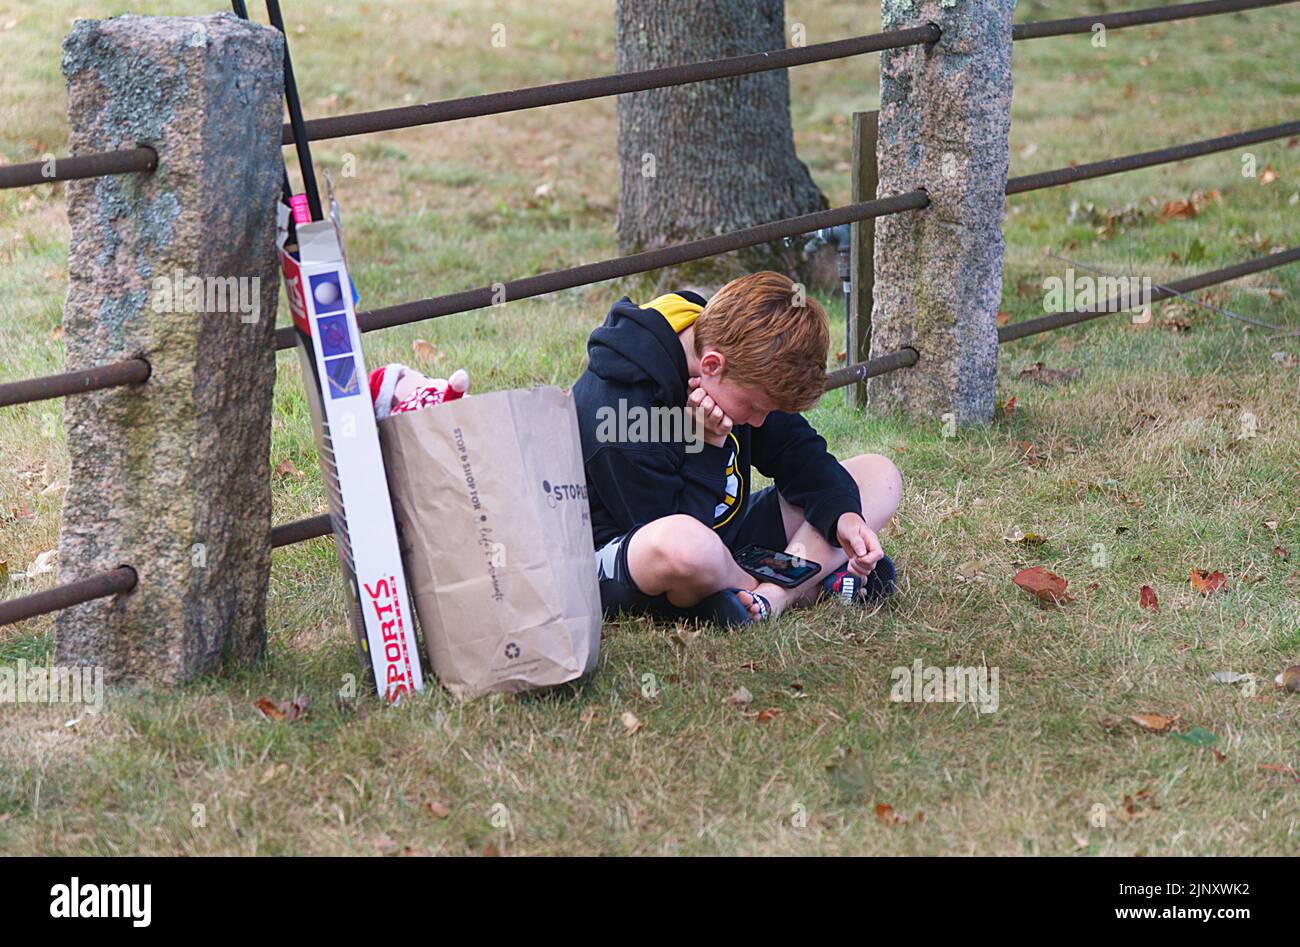 A young boy bored and checking his phone at a church flea market in Dennis, Massachusetts on Cape Cod Stock Photo